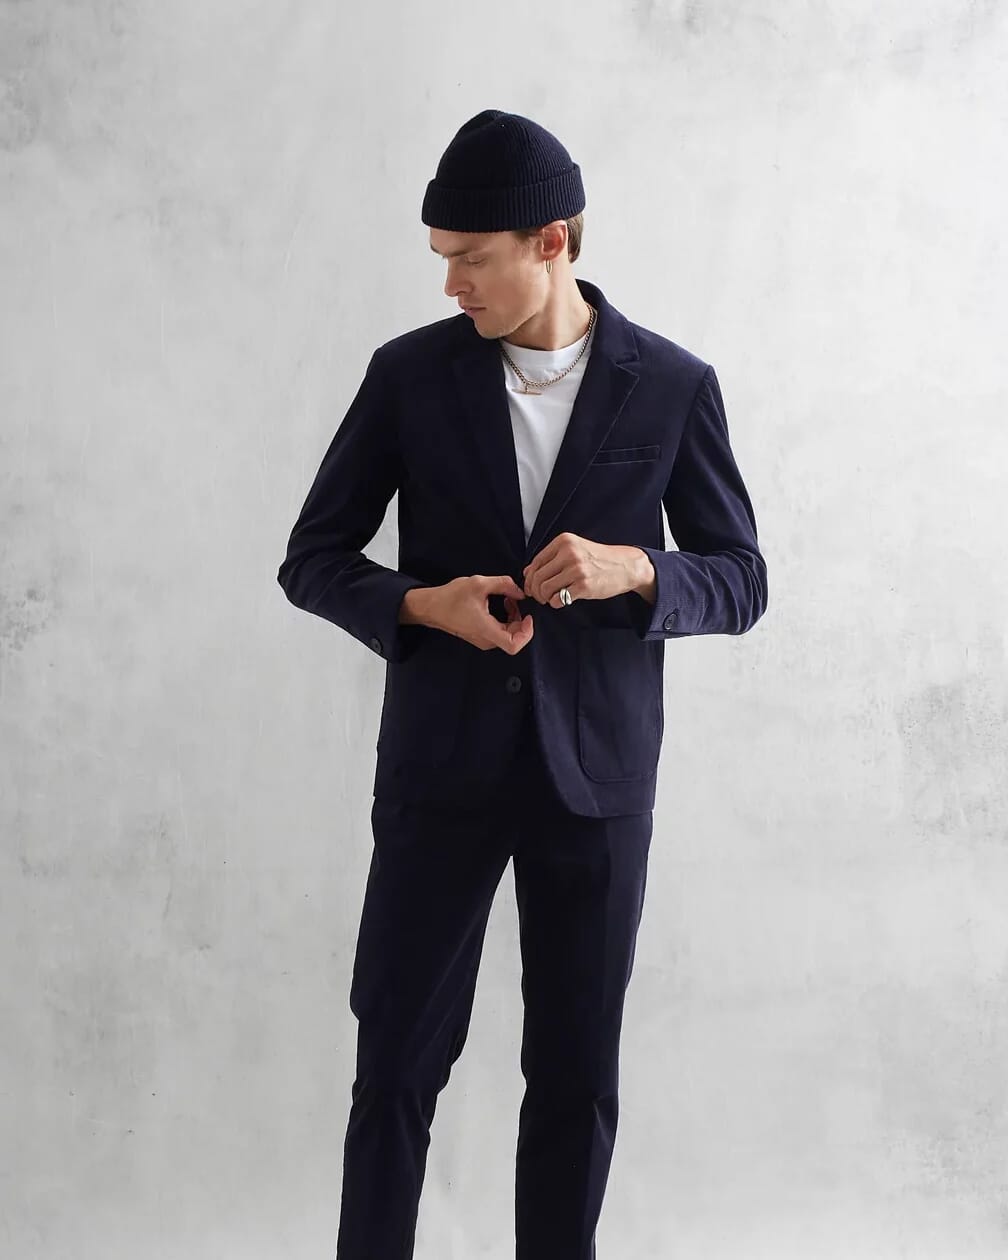 Navy Blue Blazer Combinations That Will Leave a Lasting Impression